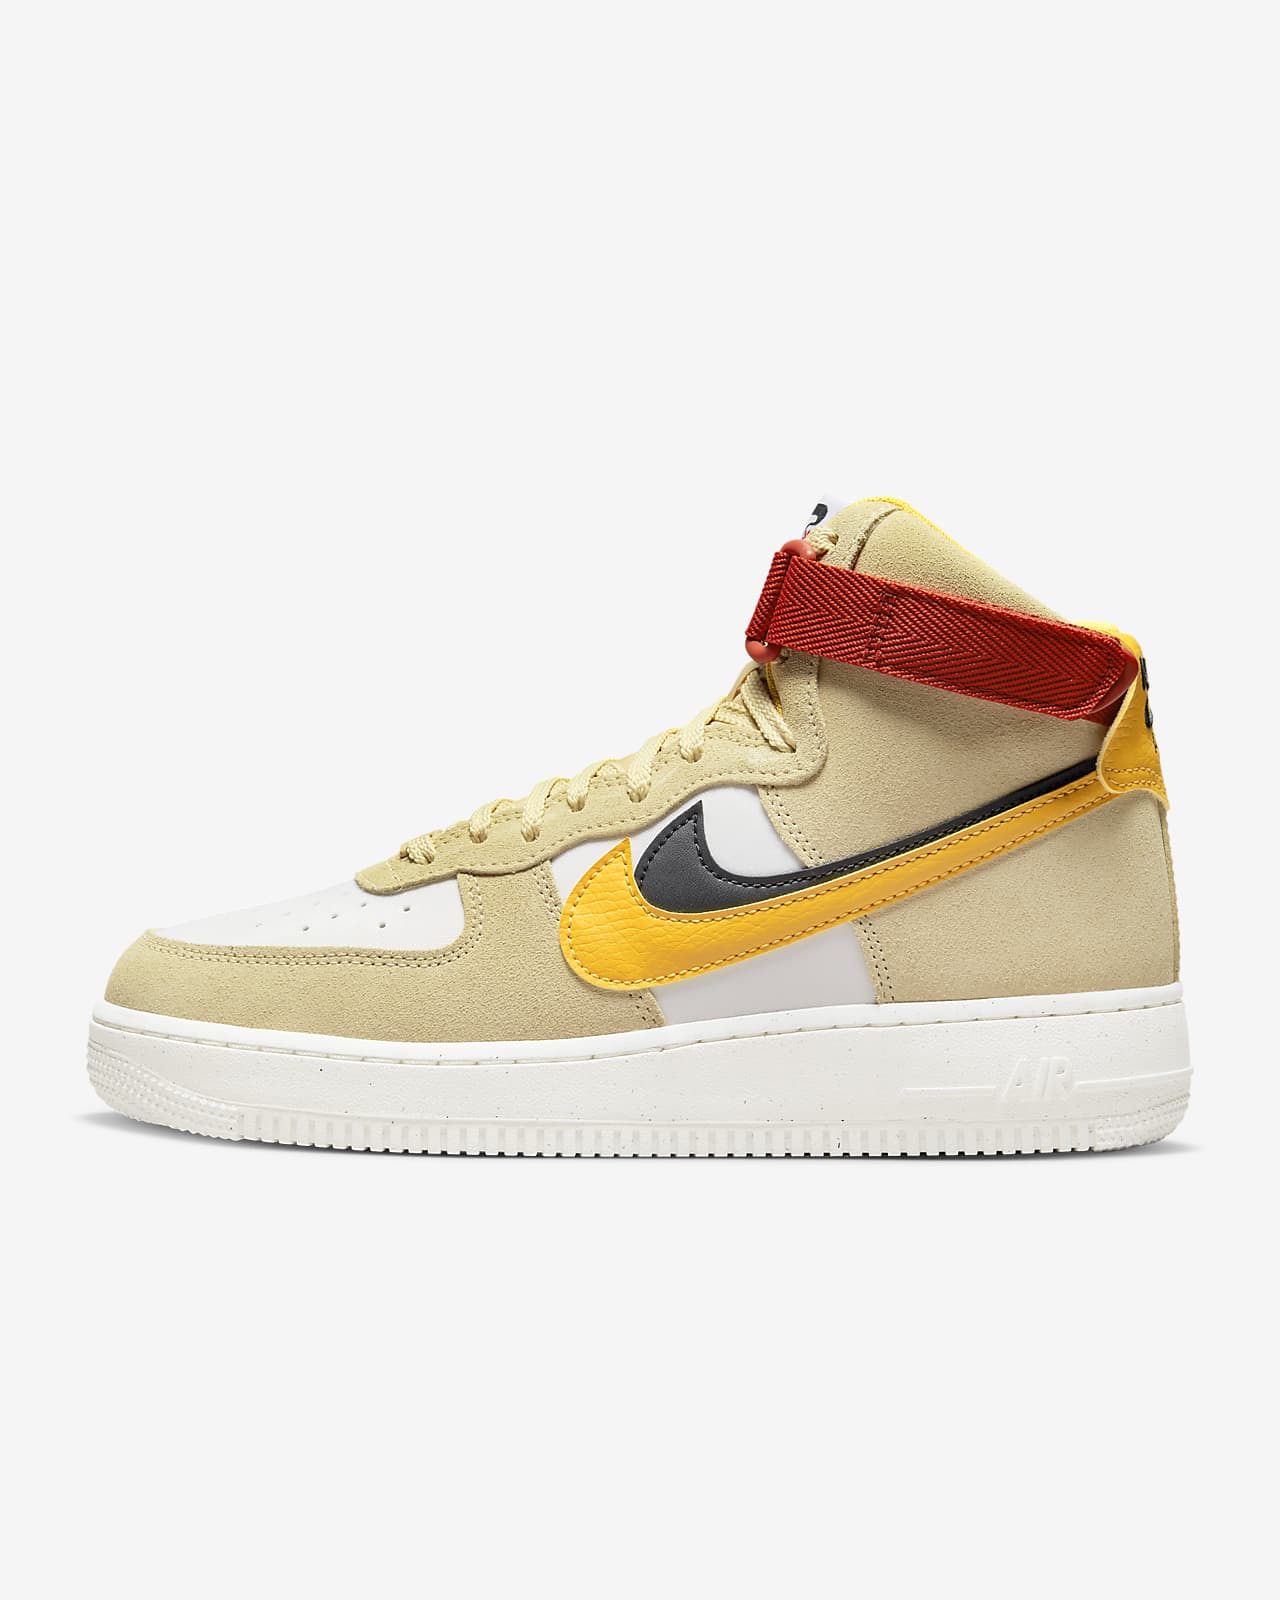 NIKE WMNS AIR FORCE 1 HIGH SE 23.5㎝ (T)